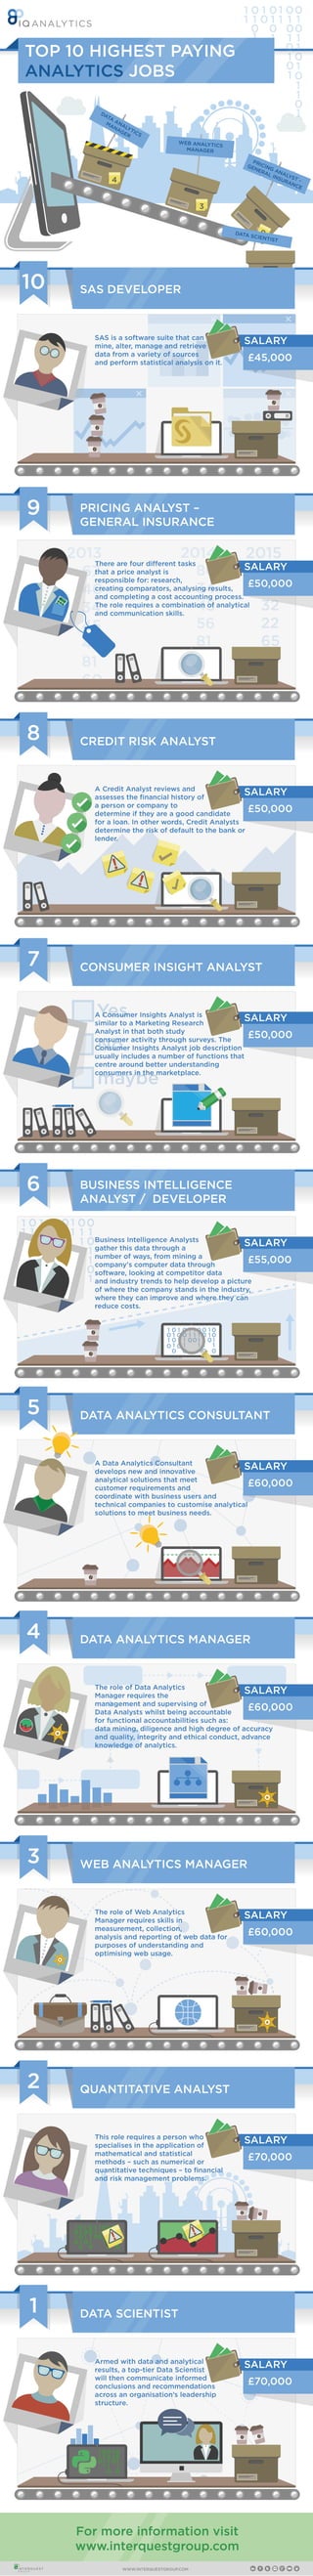 Top 10 Highest Paying Analytics Jobs 